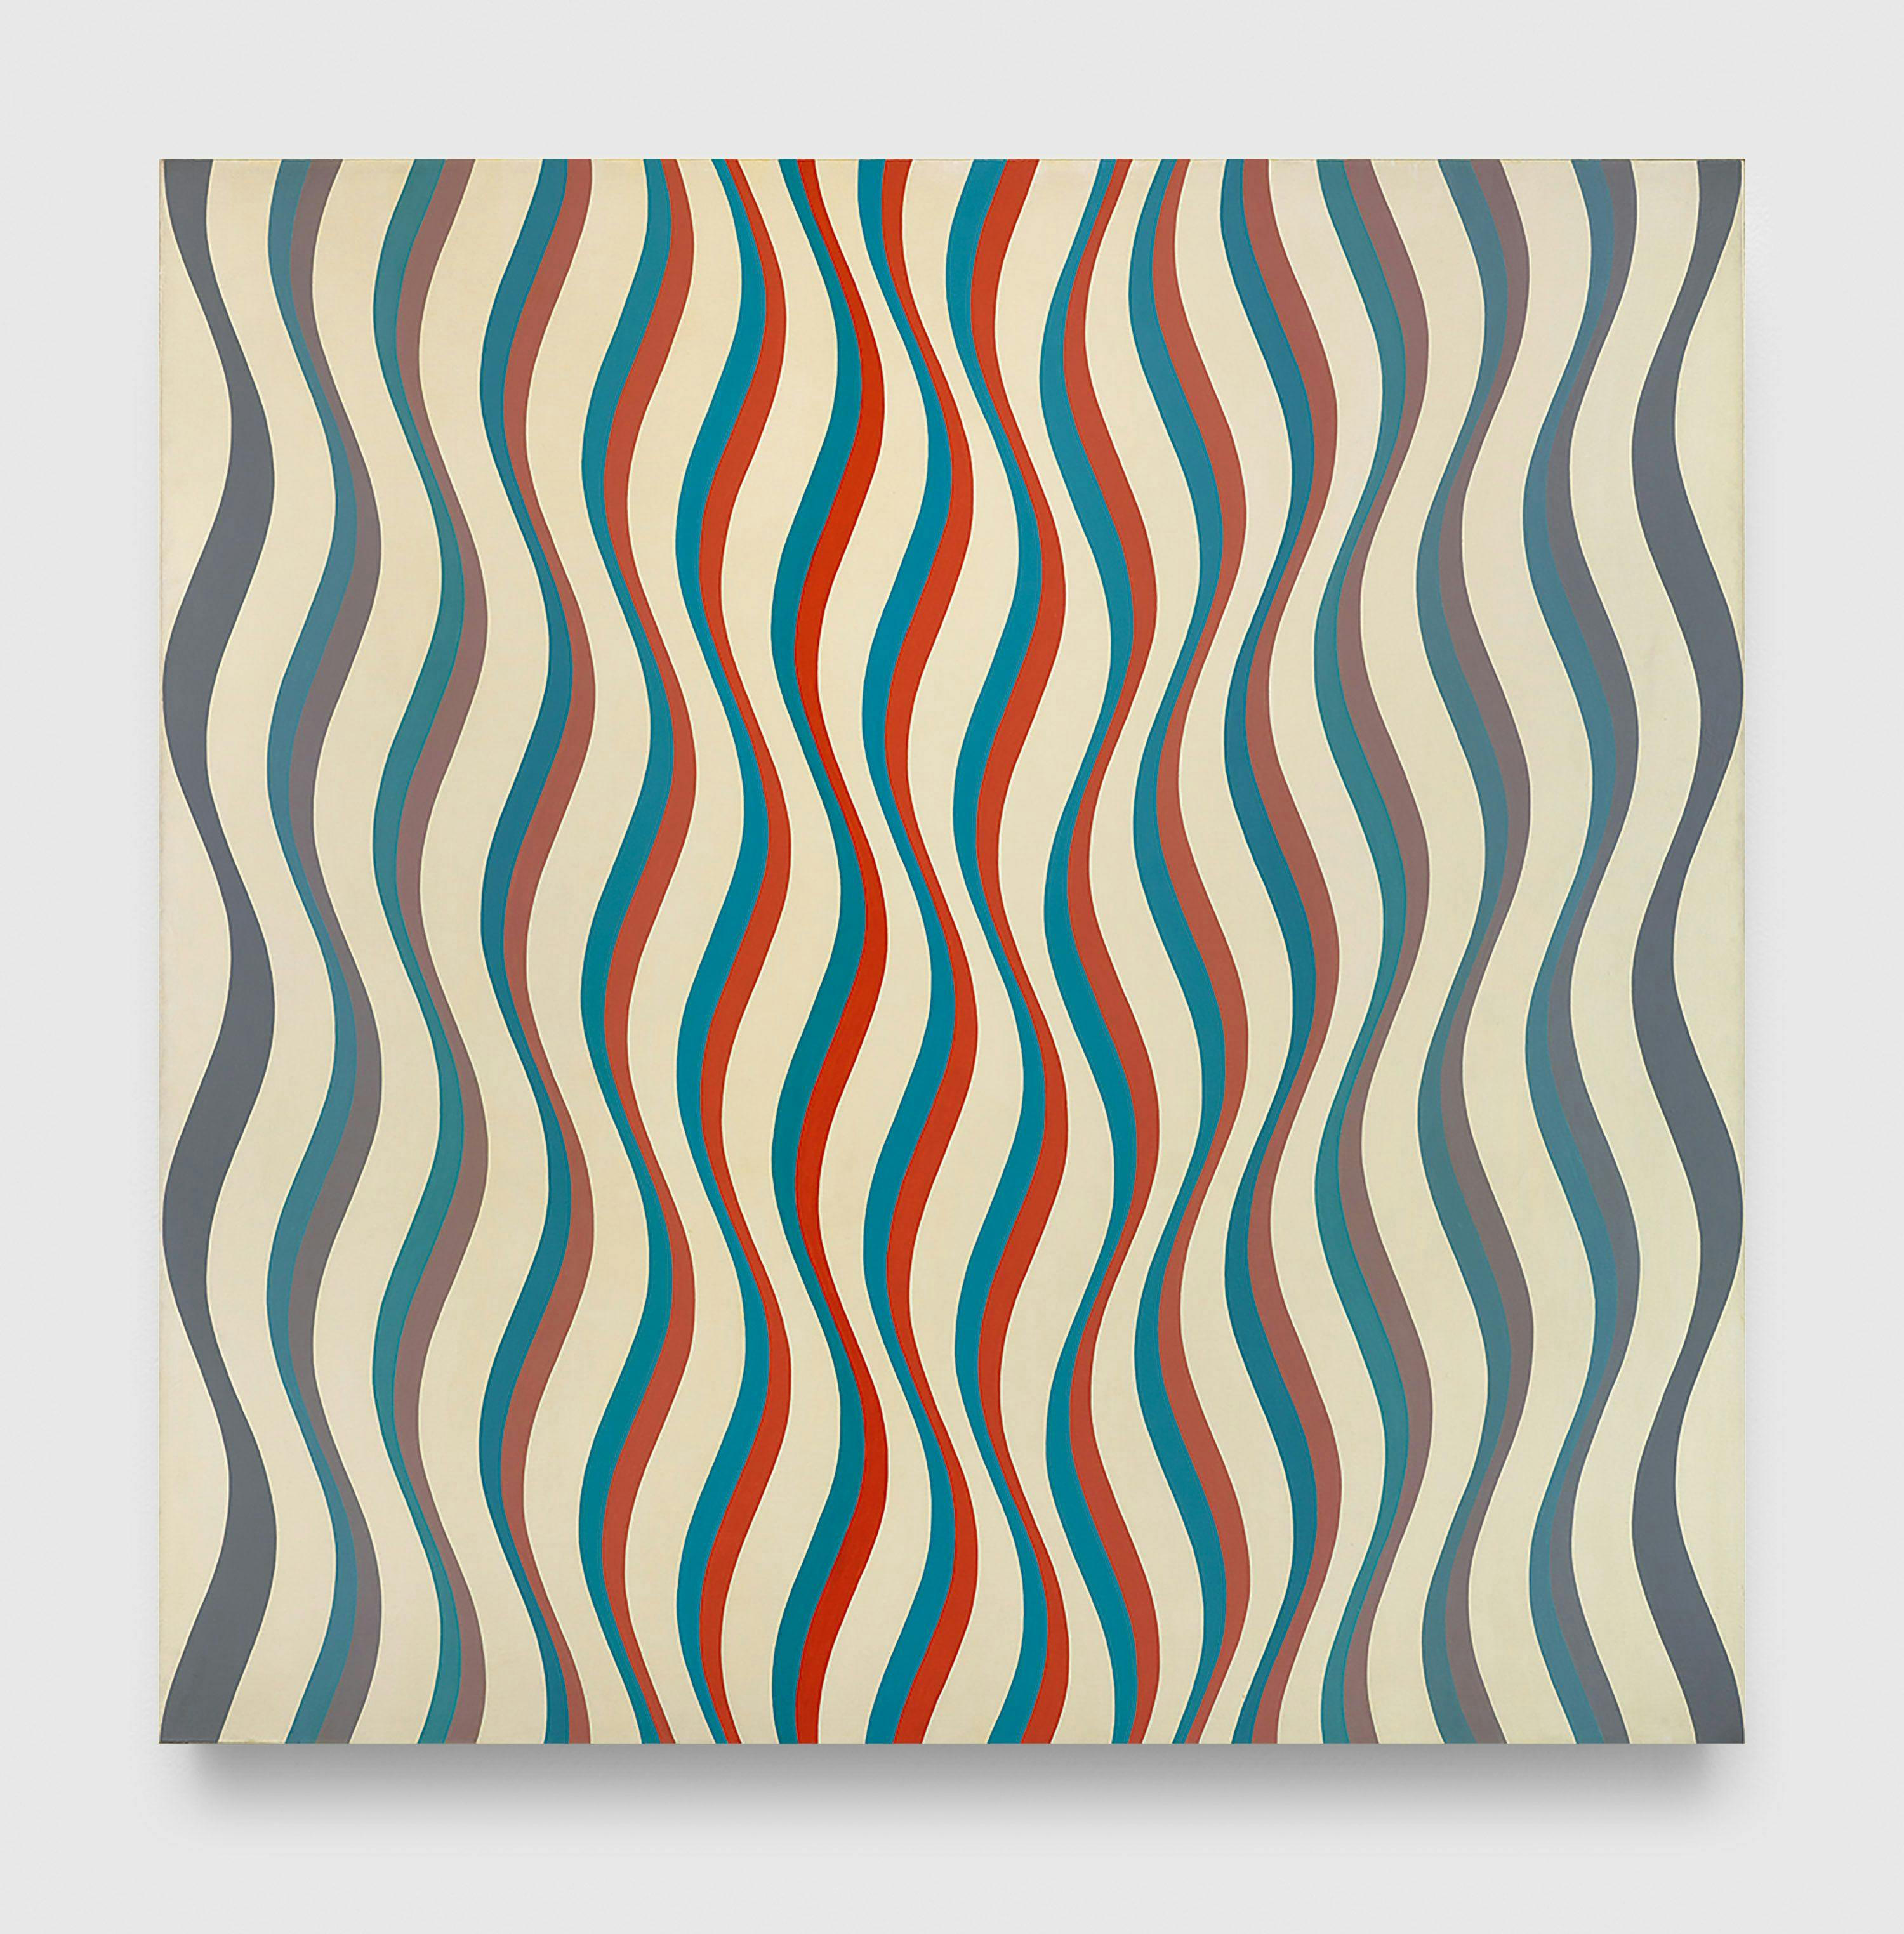 A painting by Bridget Riley, titled Cataract 1, dated 1967.